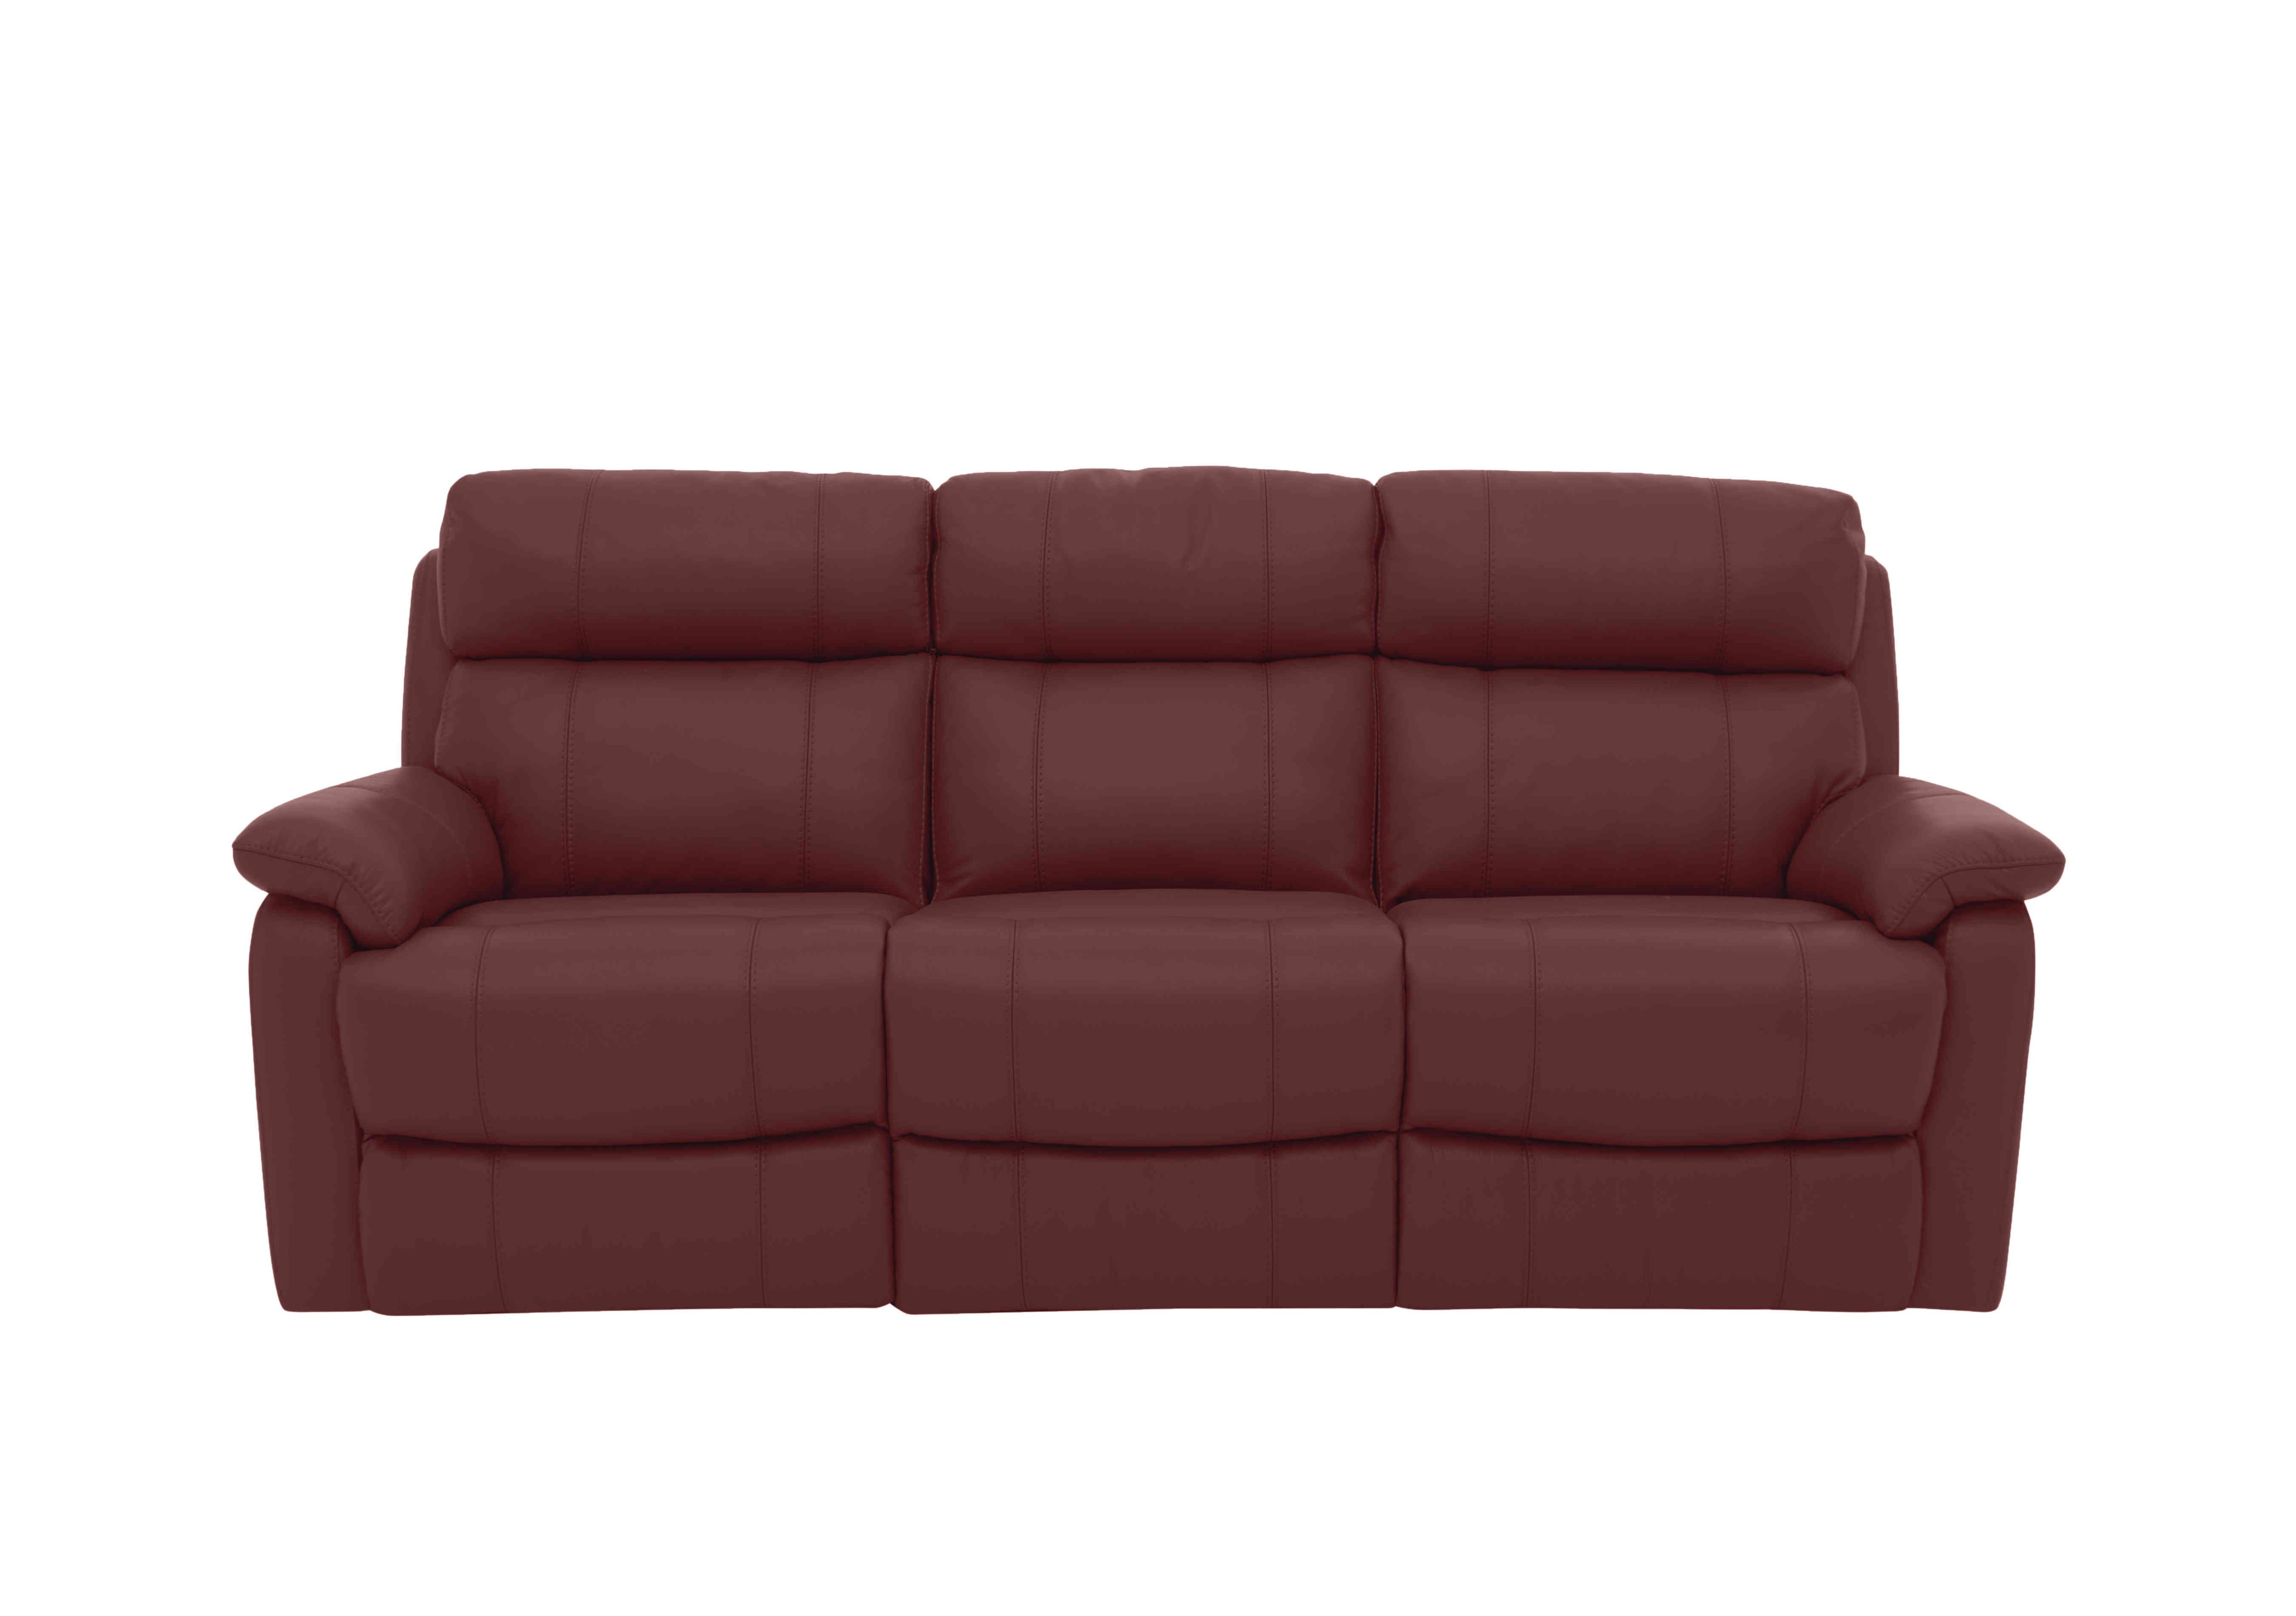 Relax Station Komodo 3 Seater Power Leather Sofa in Bv-035c Deep Red on Furniture Village